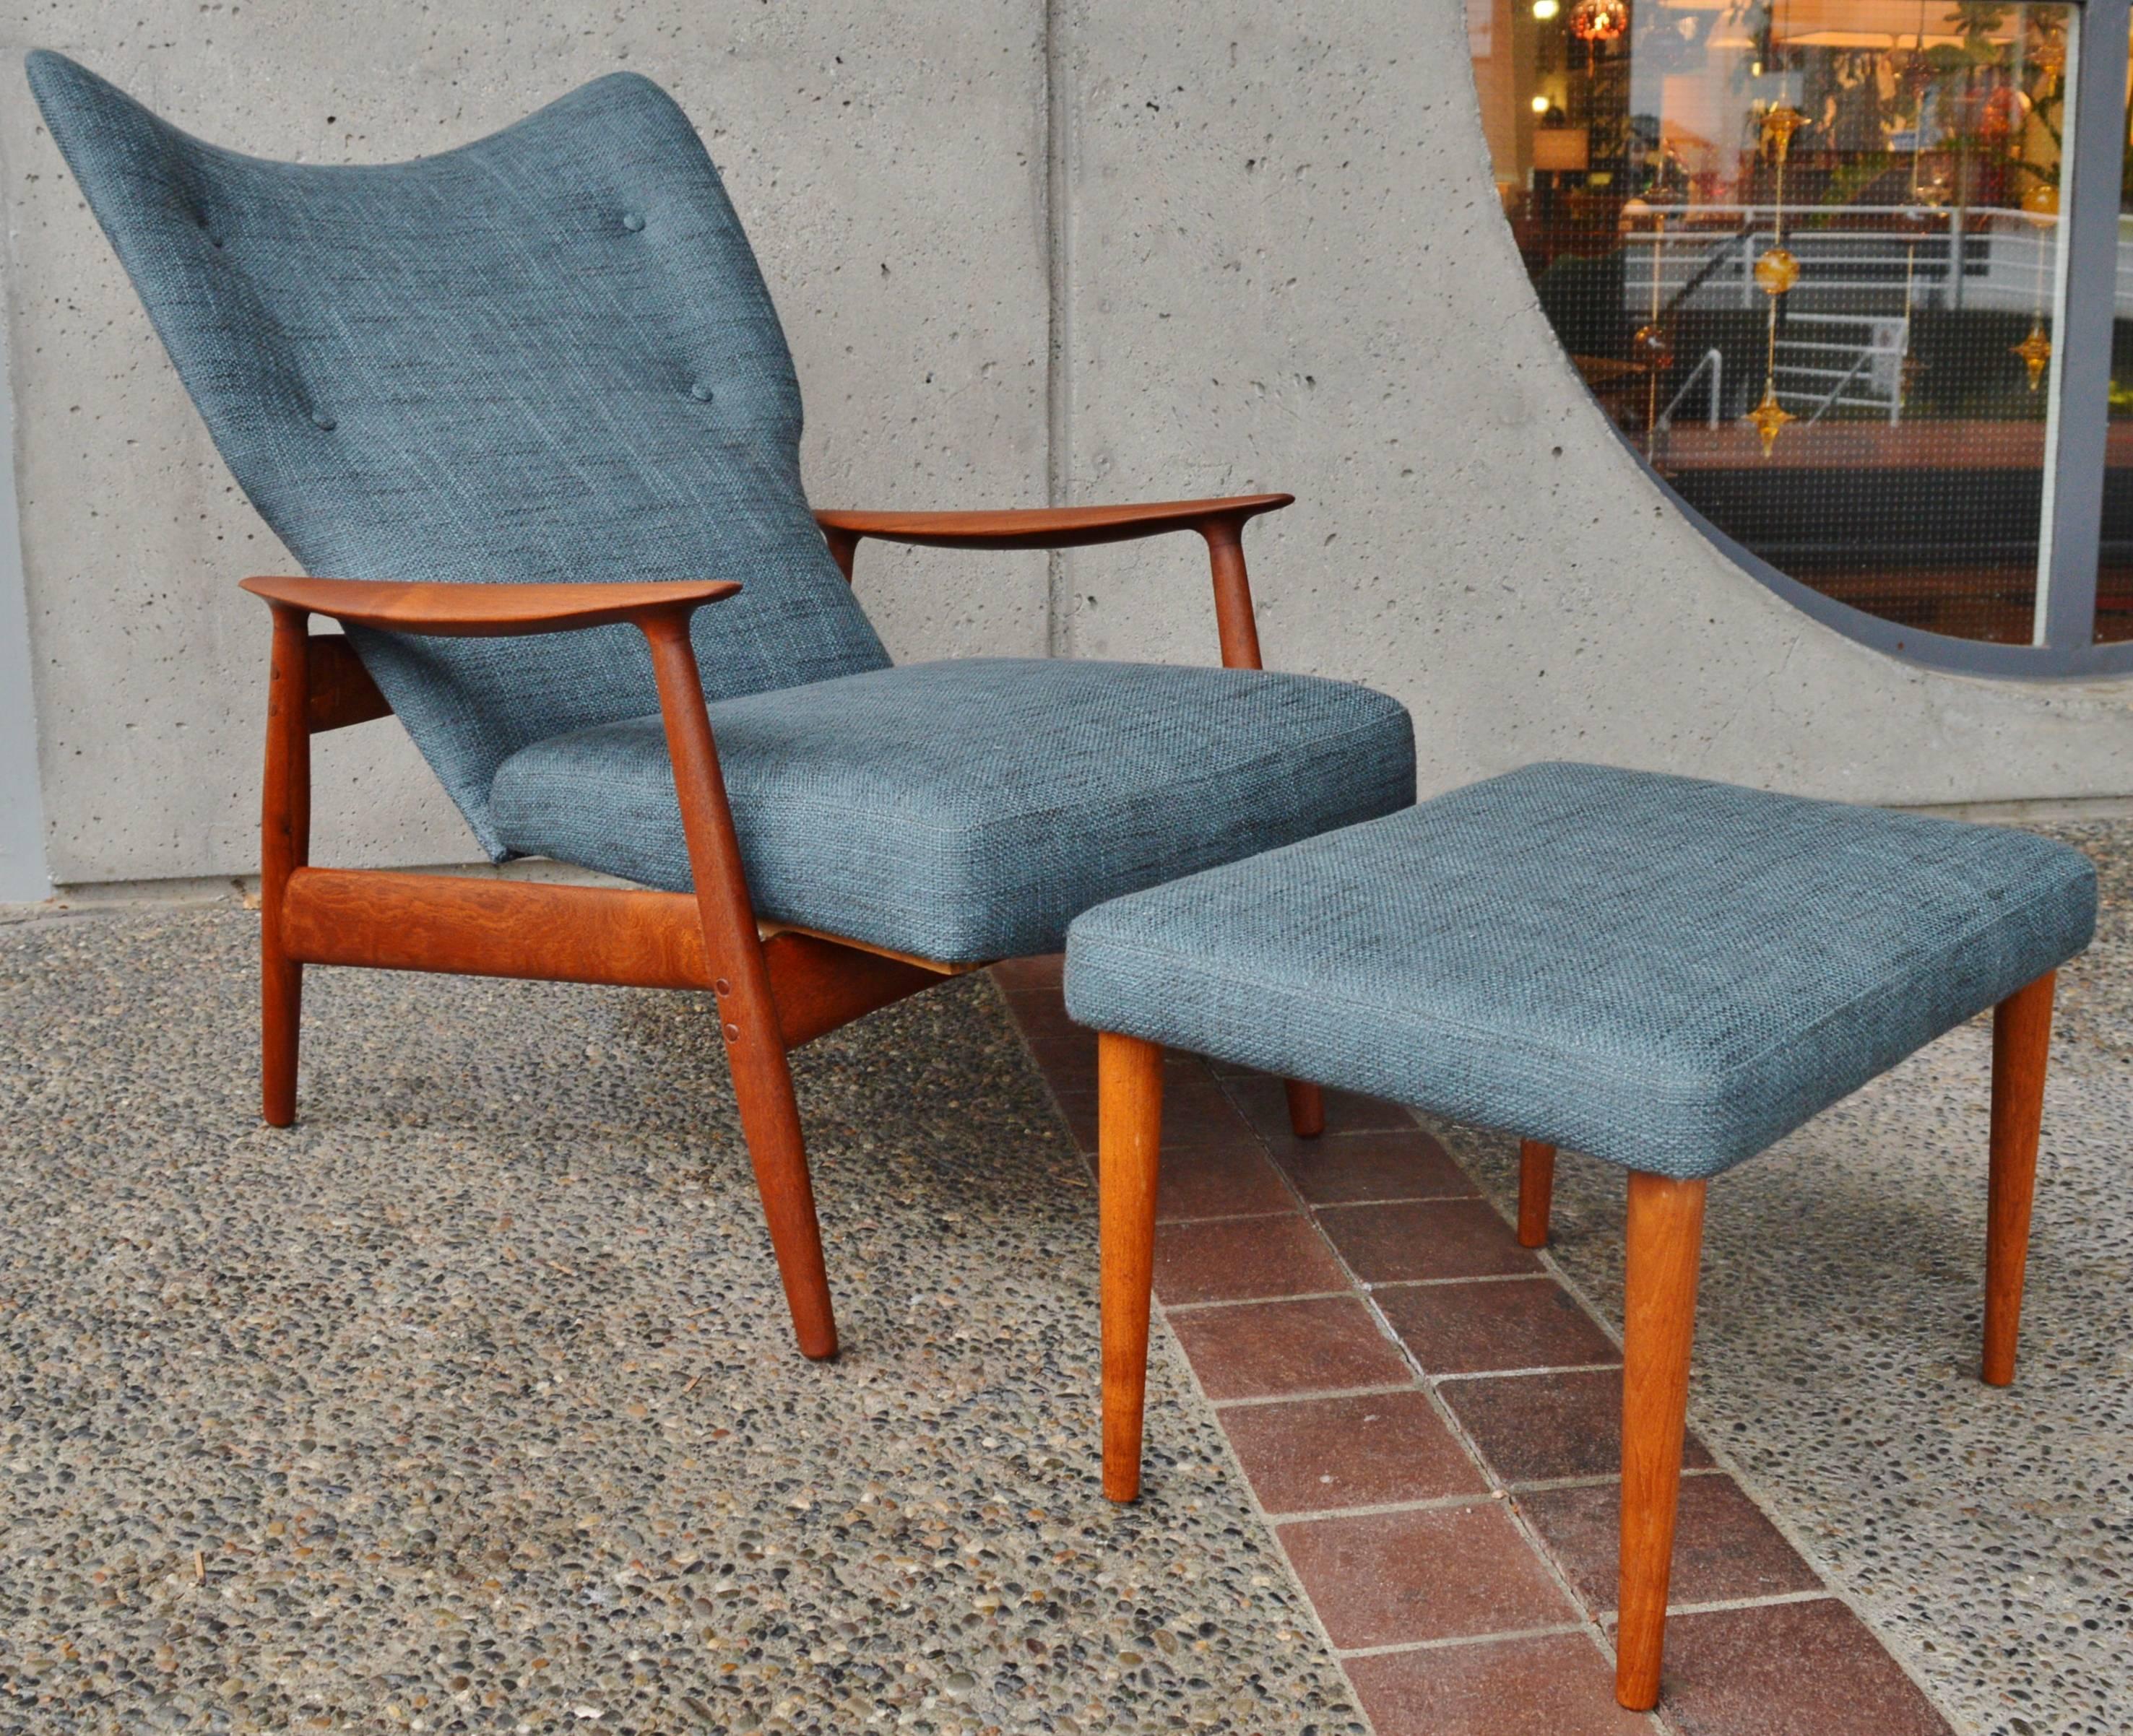 This totally killer Danish modern teak frame recliner and ottoman are a rare example designed by Peter Wessel. Featuring sultry sculpted armrests, a beautifully contoured teak frame with conical legs that match the ottoman, and totally restored and